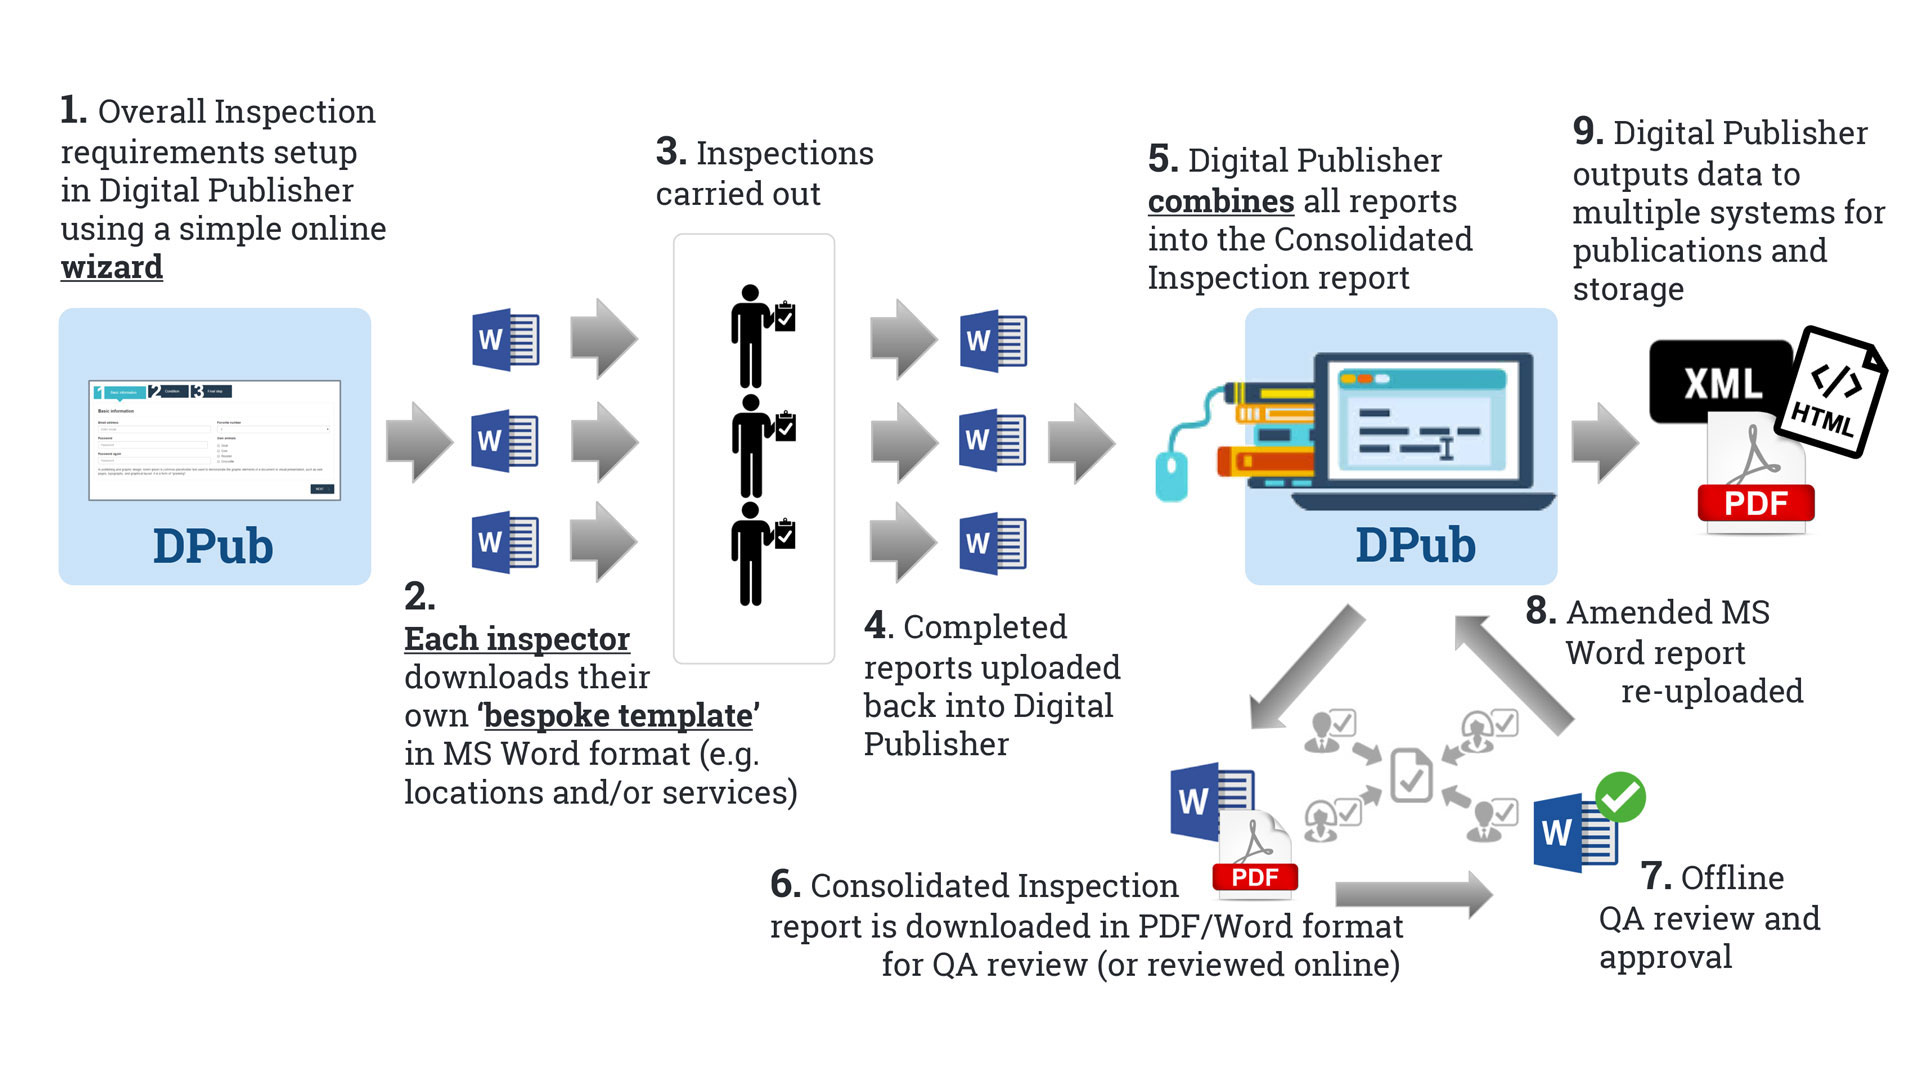 Illustration of inspection process workflow